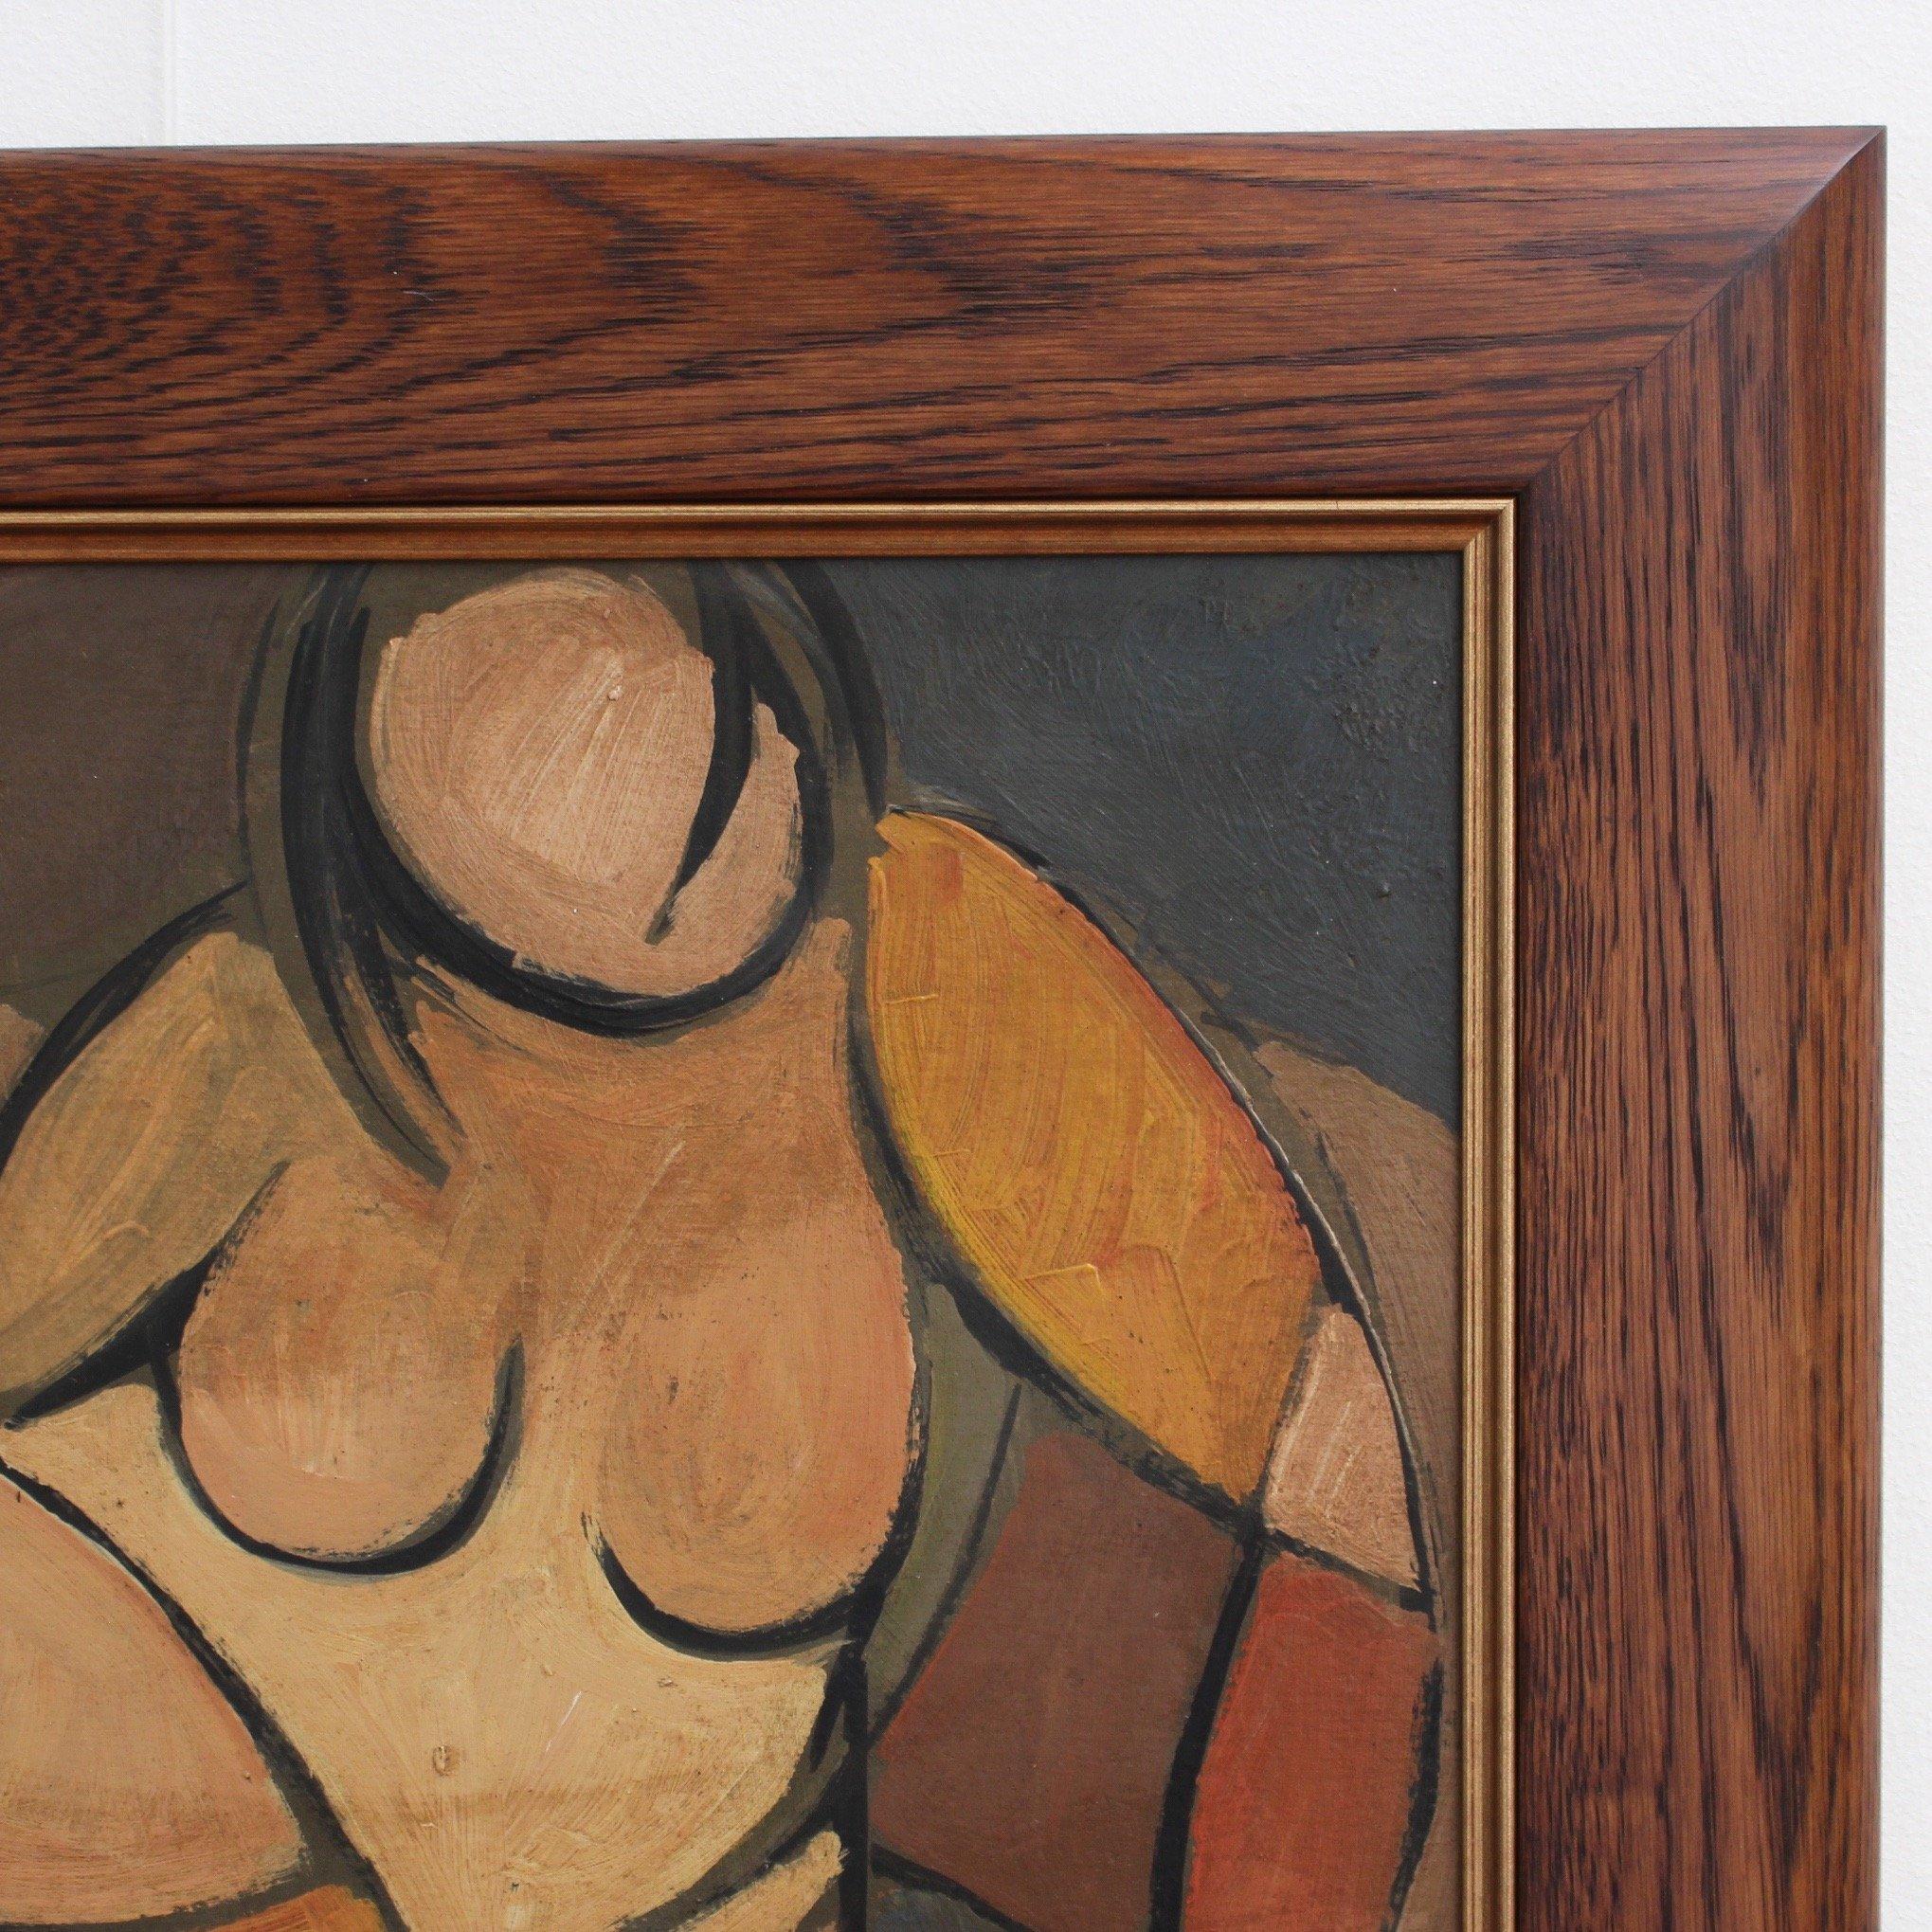 'Portrait of Reclining Woman' by STM, Modern Cubist Nude Oil Painting, Berlin 2